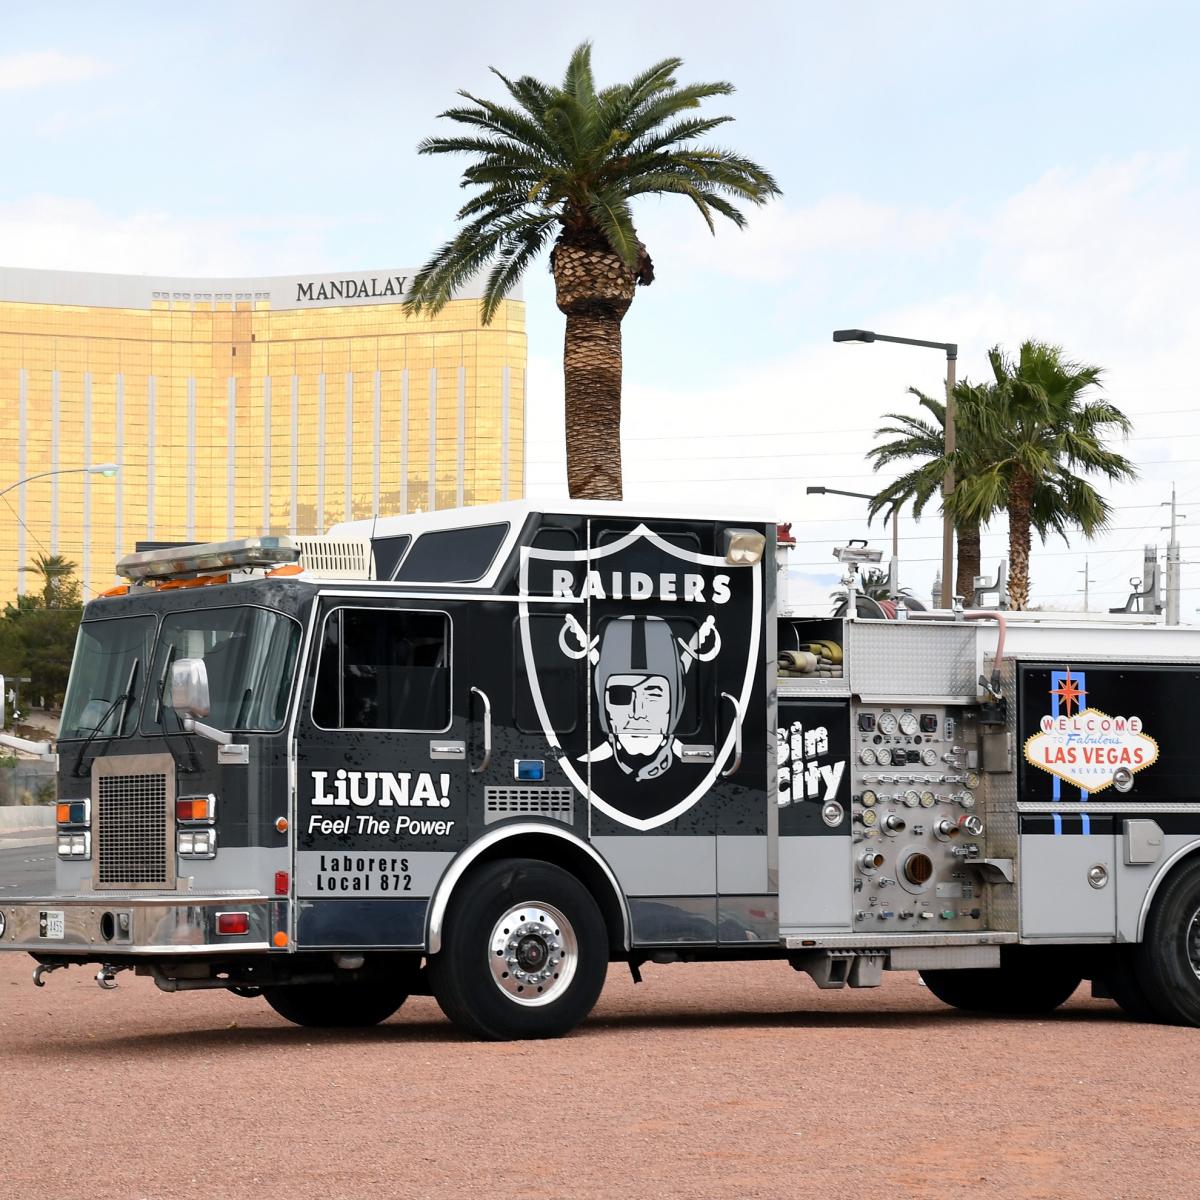 Stadium Authority approves lease agreement with Raiders, keeping project on  course - The Nevada Independent